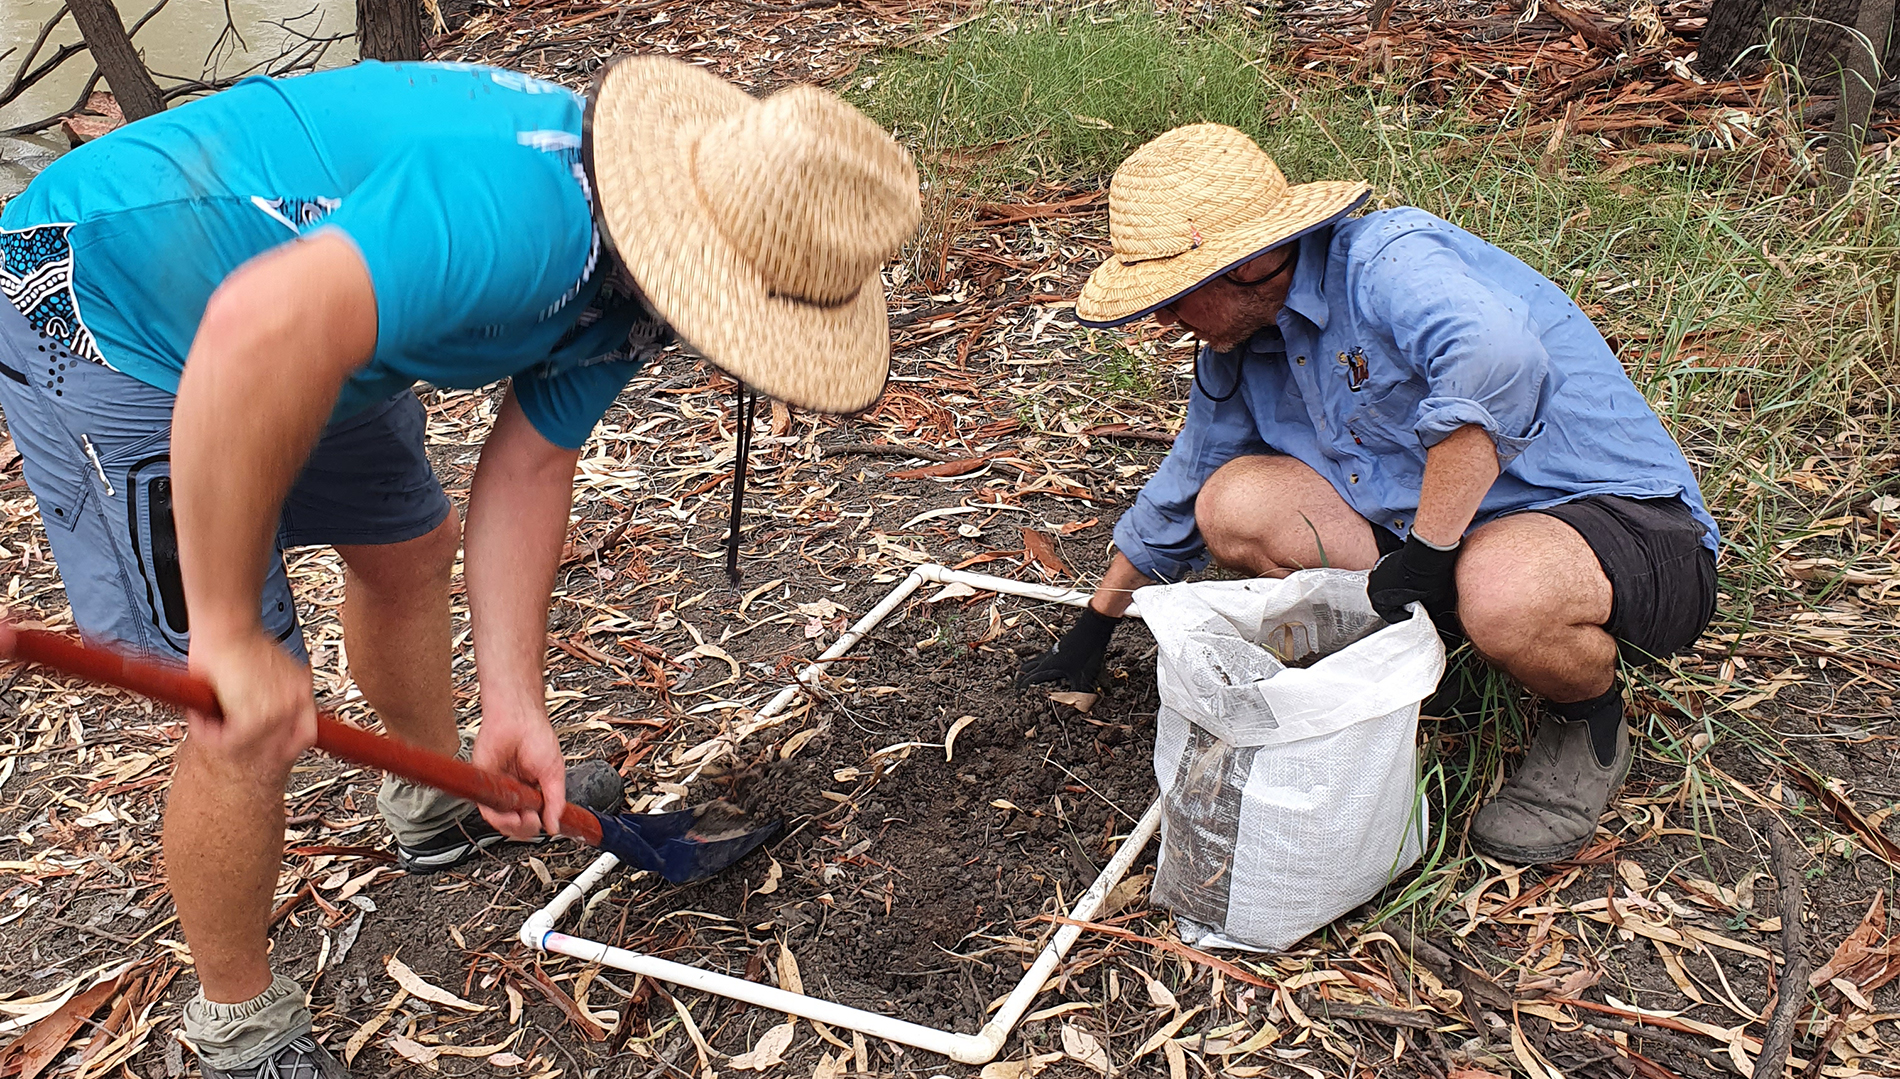 Department of Planning and Environment–Water and University of Canberra scientists collecting sediments from the river bank to measure ecosystem responses to high flows.